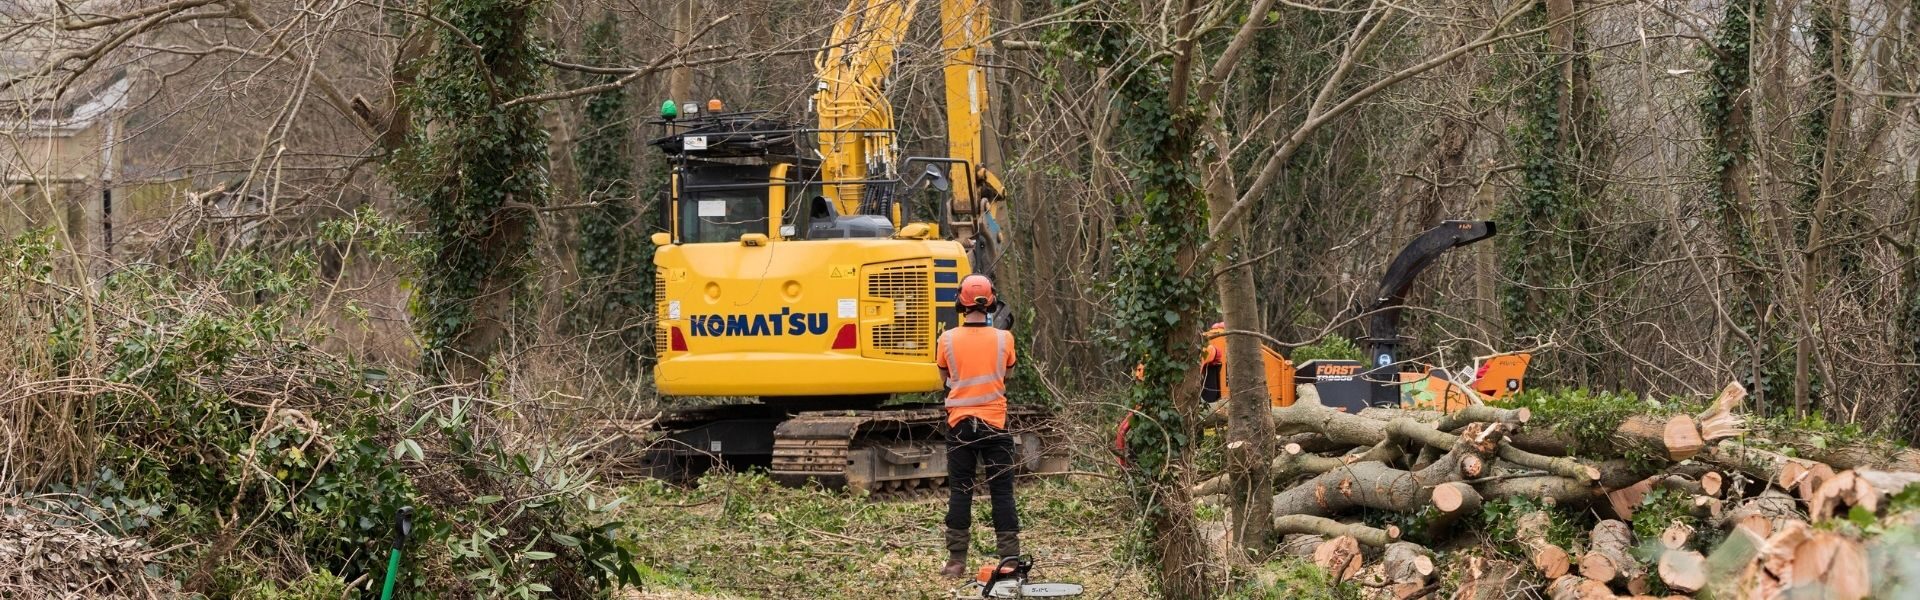 Preserving wildlife among the dying ash for Brighton and Hove City Council